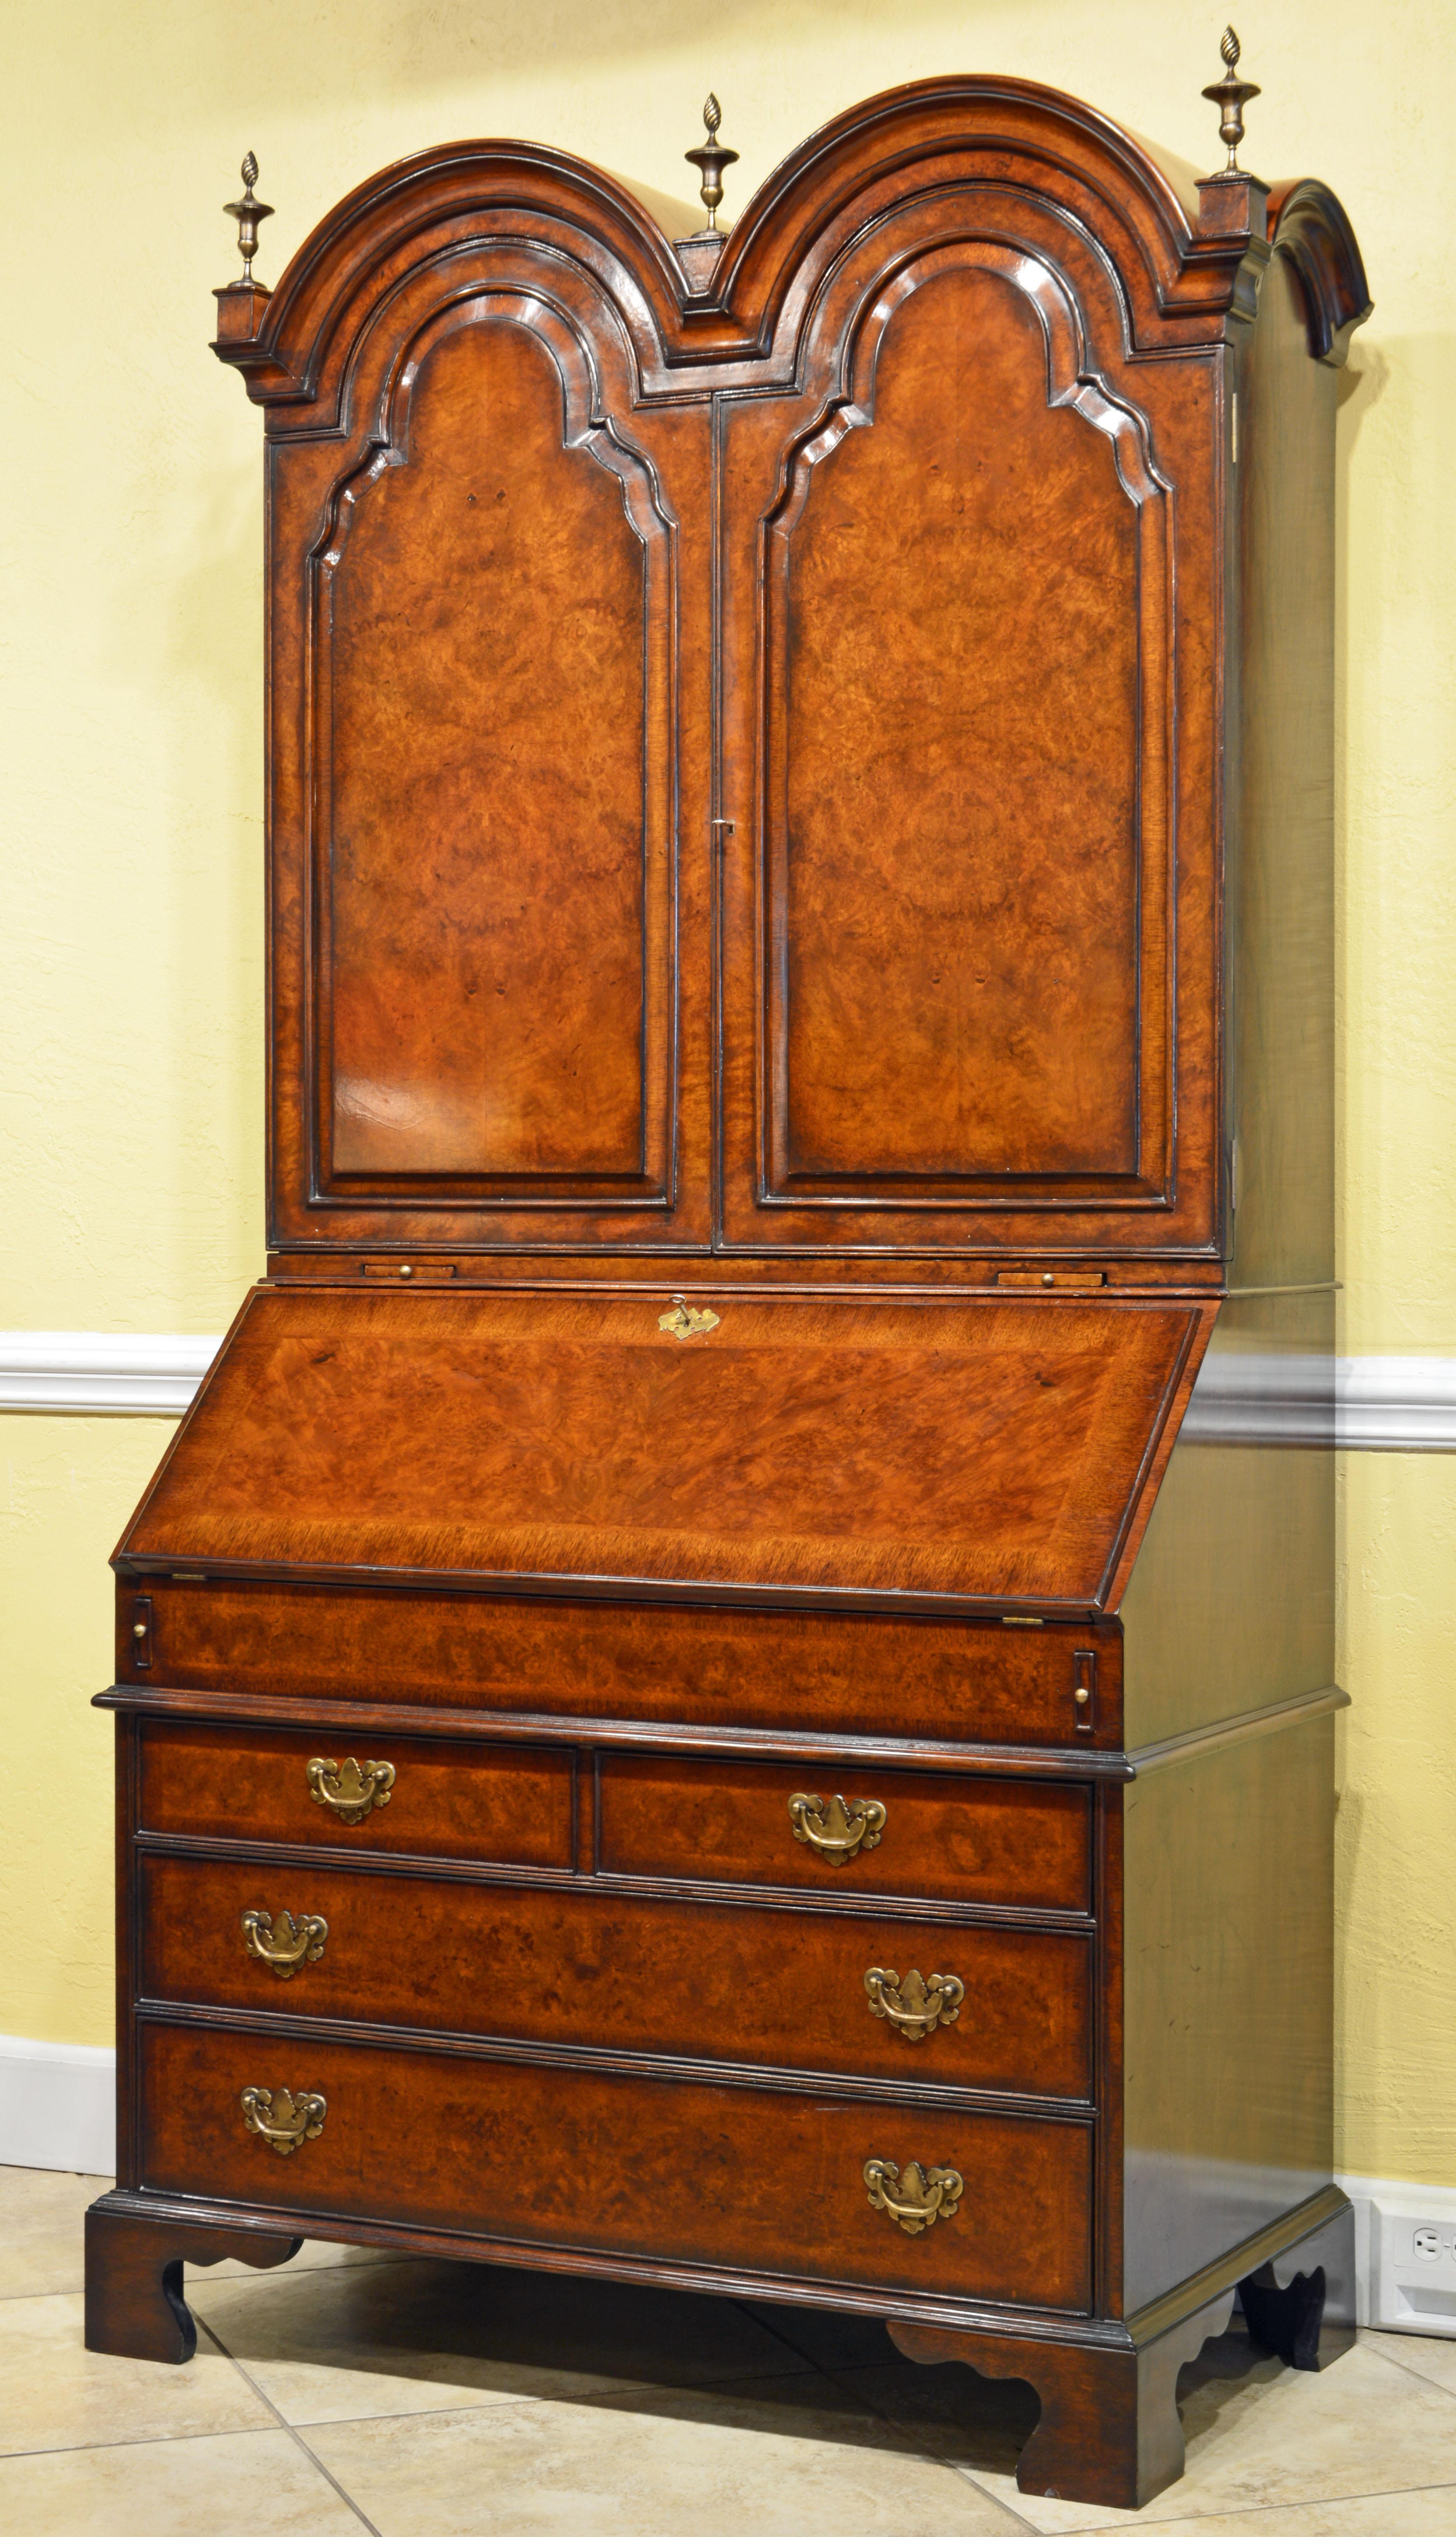 An English burled walnut Queen Anne style two part secretary desk with a double domed top and carved urn form brass finials. The wooden tombstone doors enclose a fully fitted interior with multiple drawers, pigeon holes, document compartments,